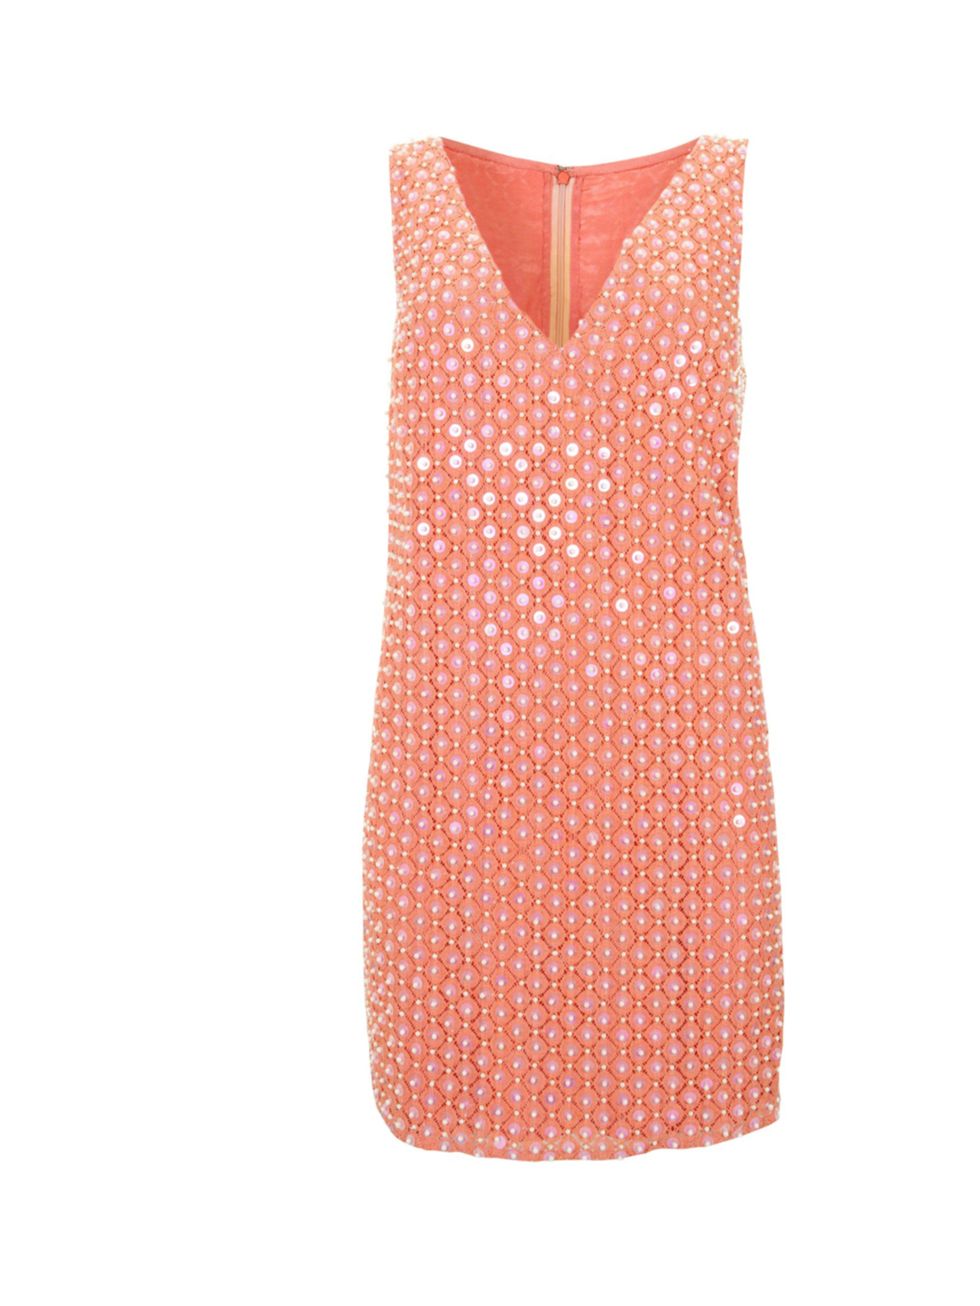 <p>Spring may have only just begun but Topshops high summer dress collection has just landed in stores. This ultra girly 60s-inspired dress ticks all the garden party boxes... <a href="http://www.topshop.com/webapp/wcs/stores/servlet/CatalogNavigationSea